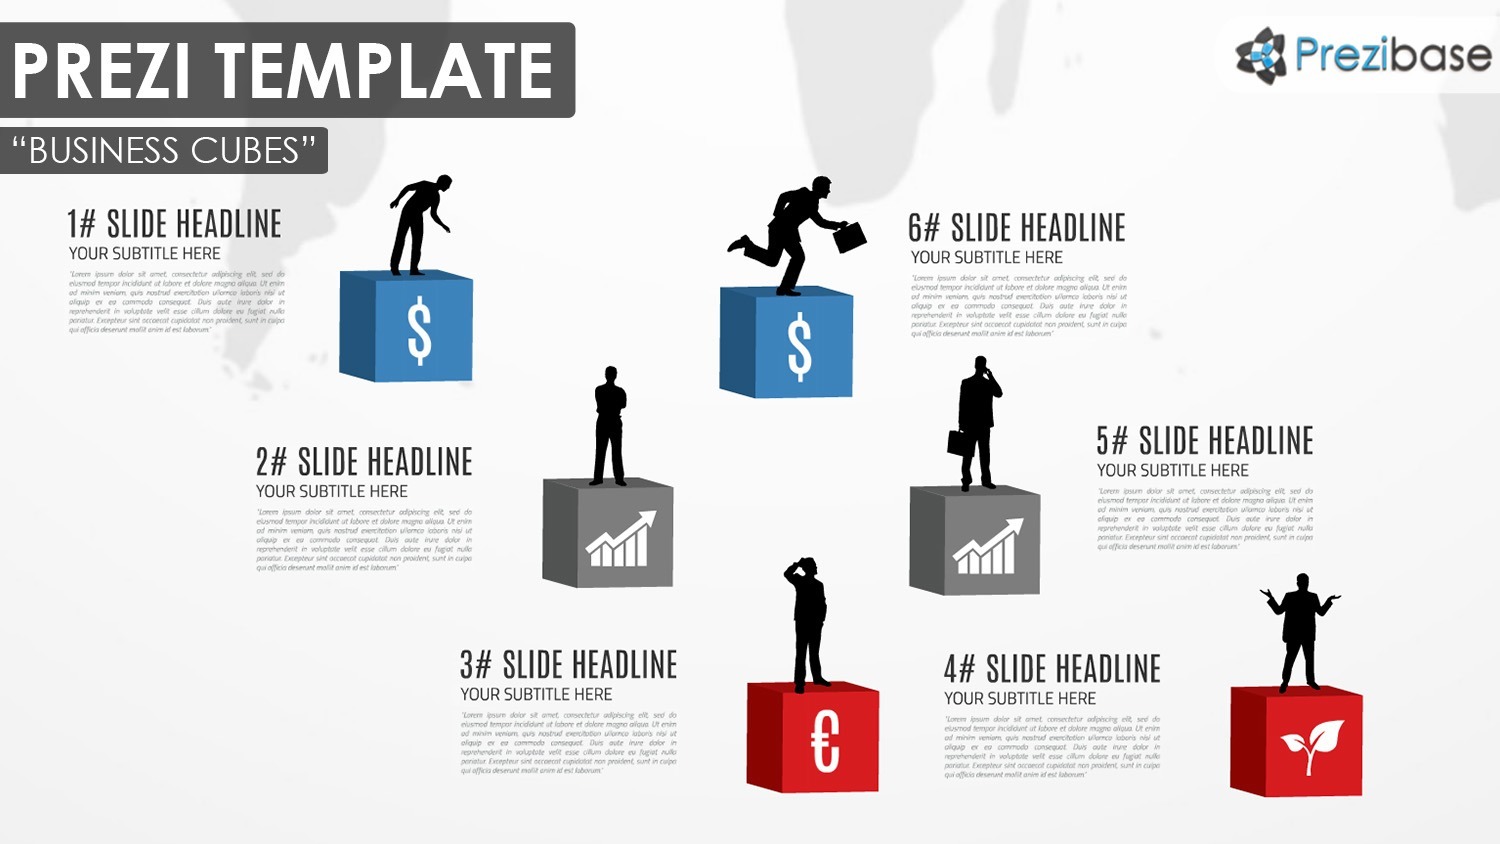 3D diagram cubes for business presentation and silhouettes infographic prezi template